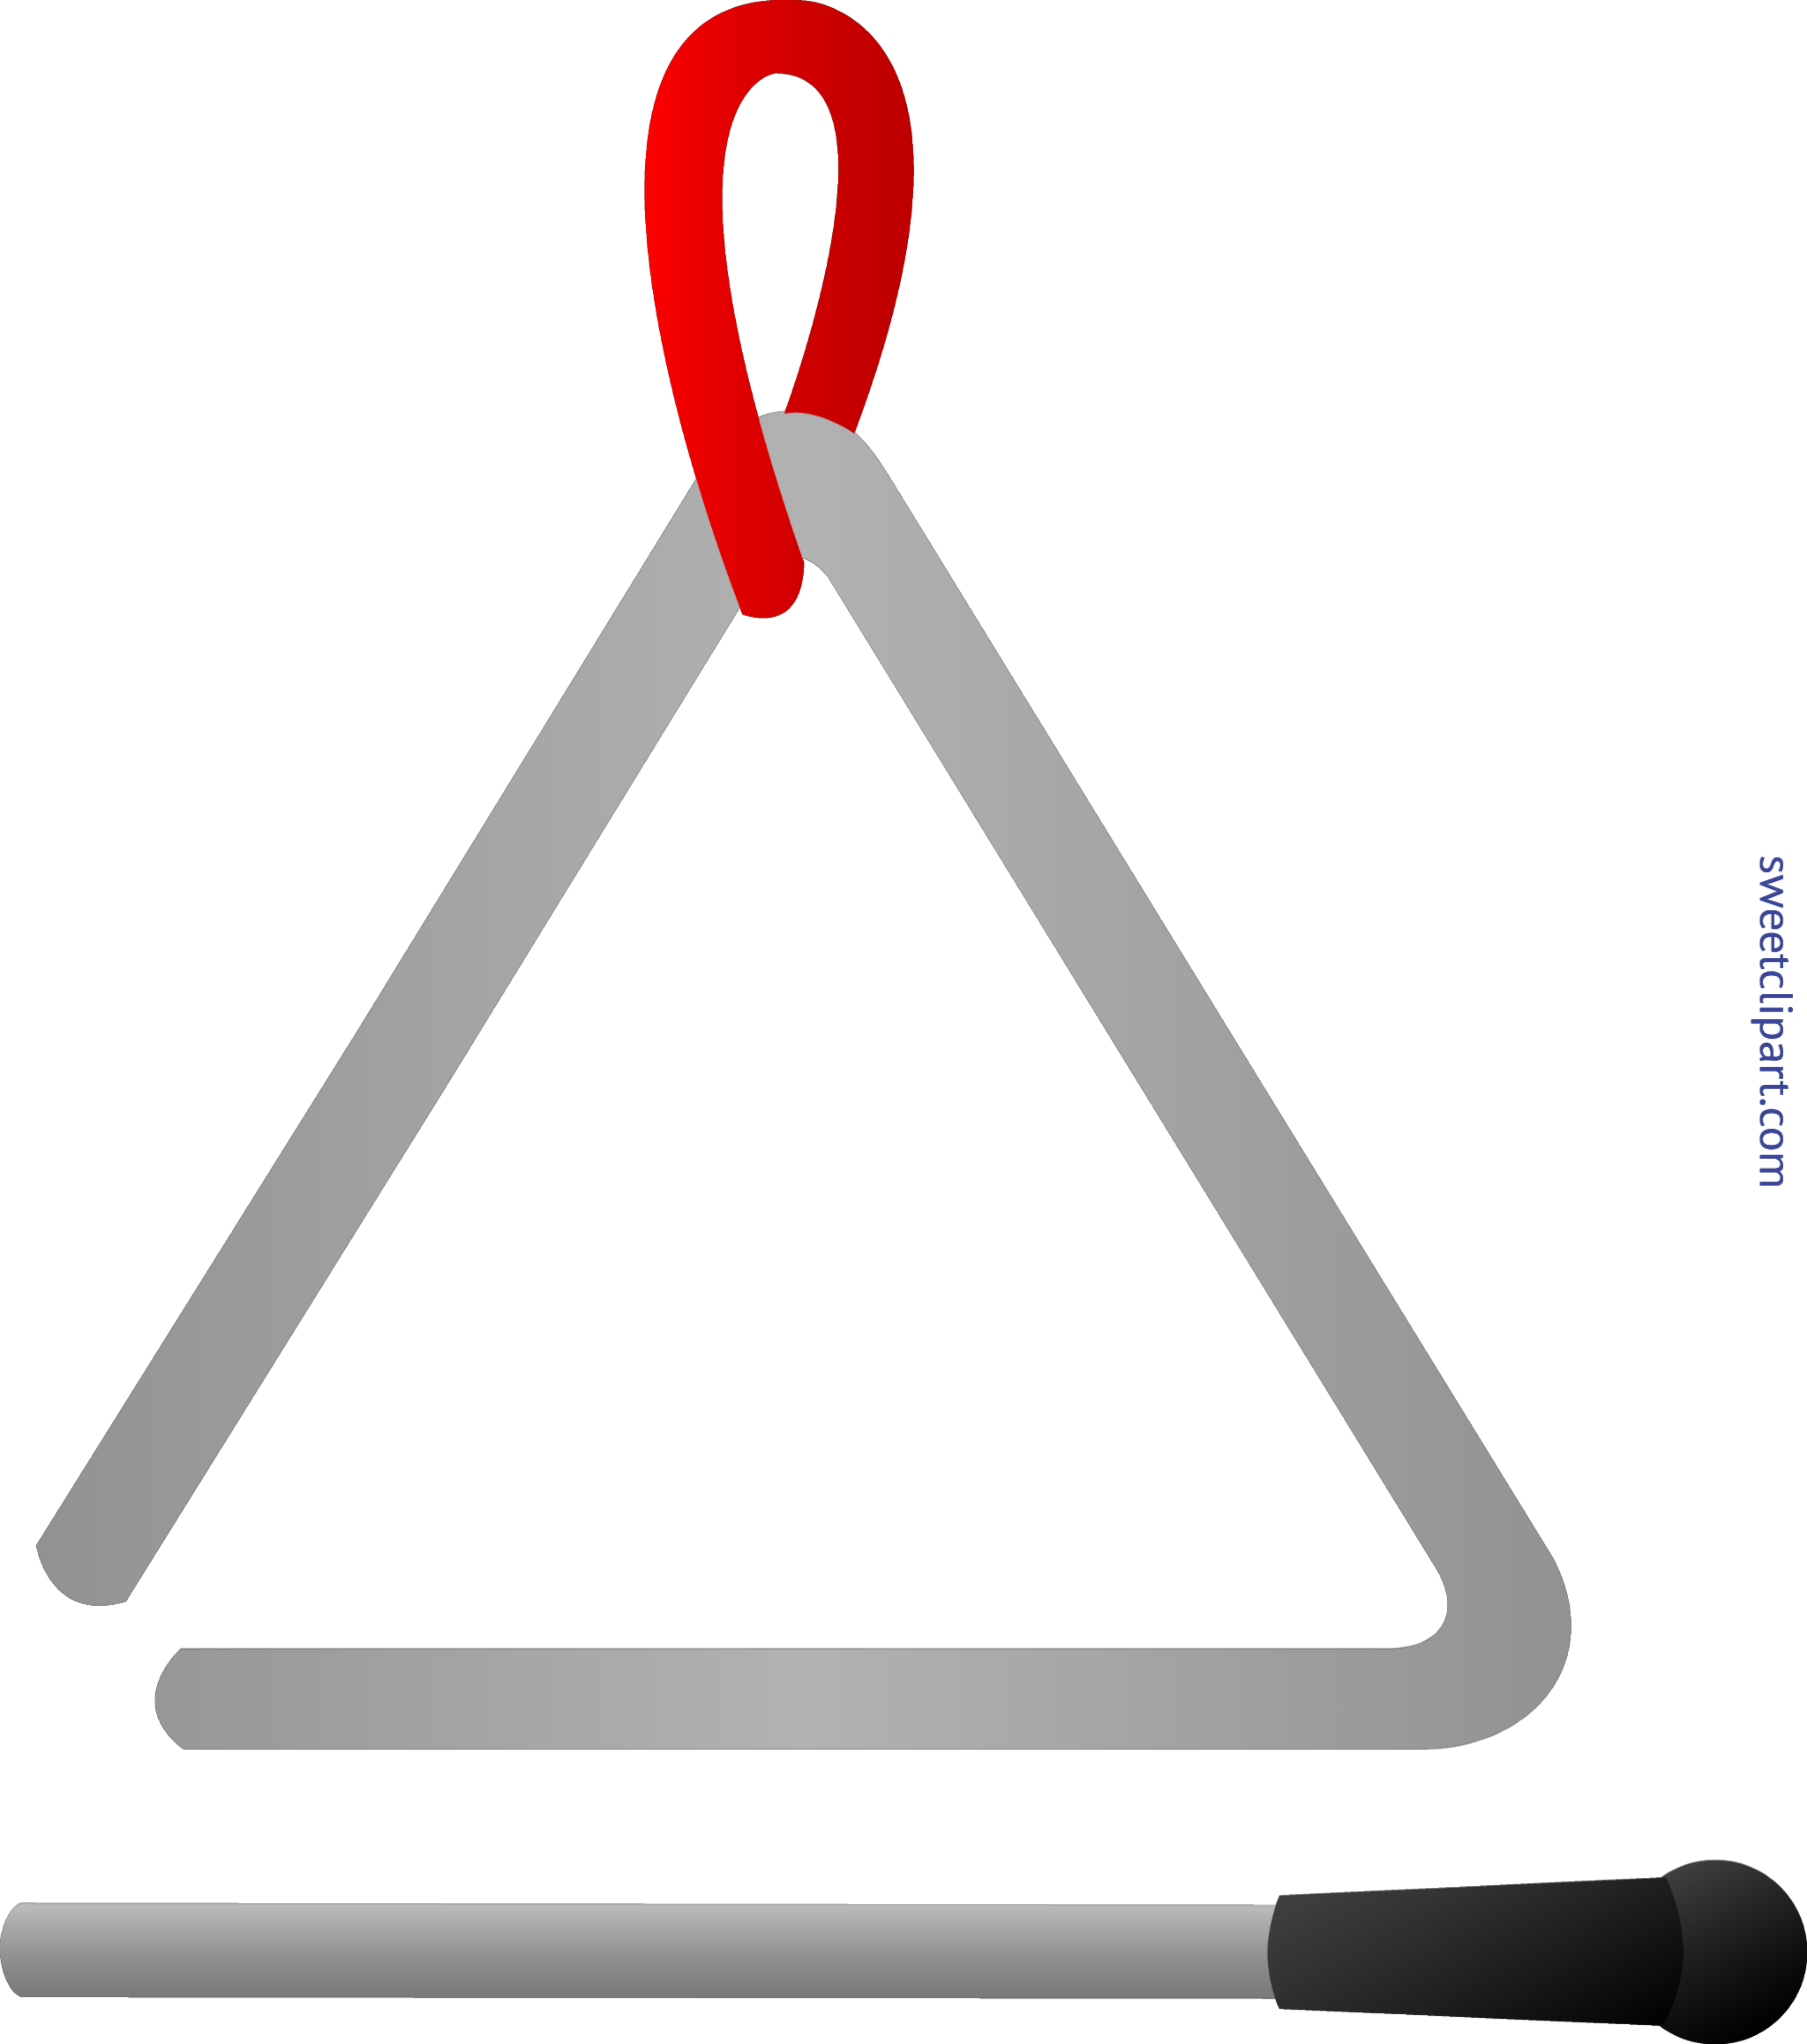 A Triangle With A Red Strap